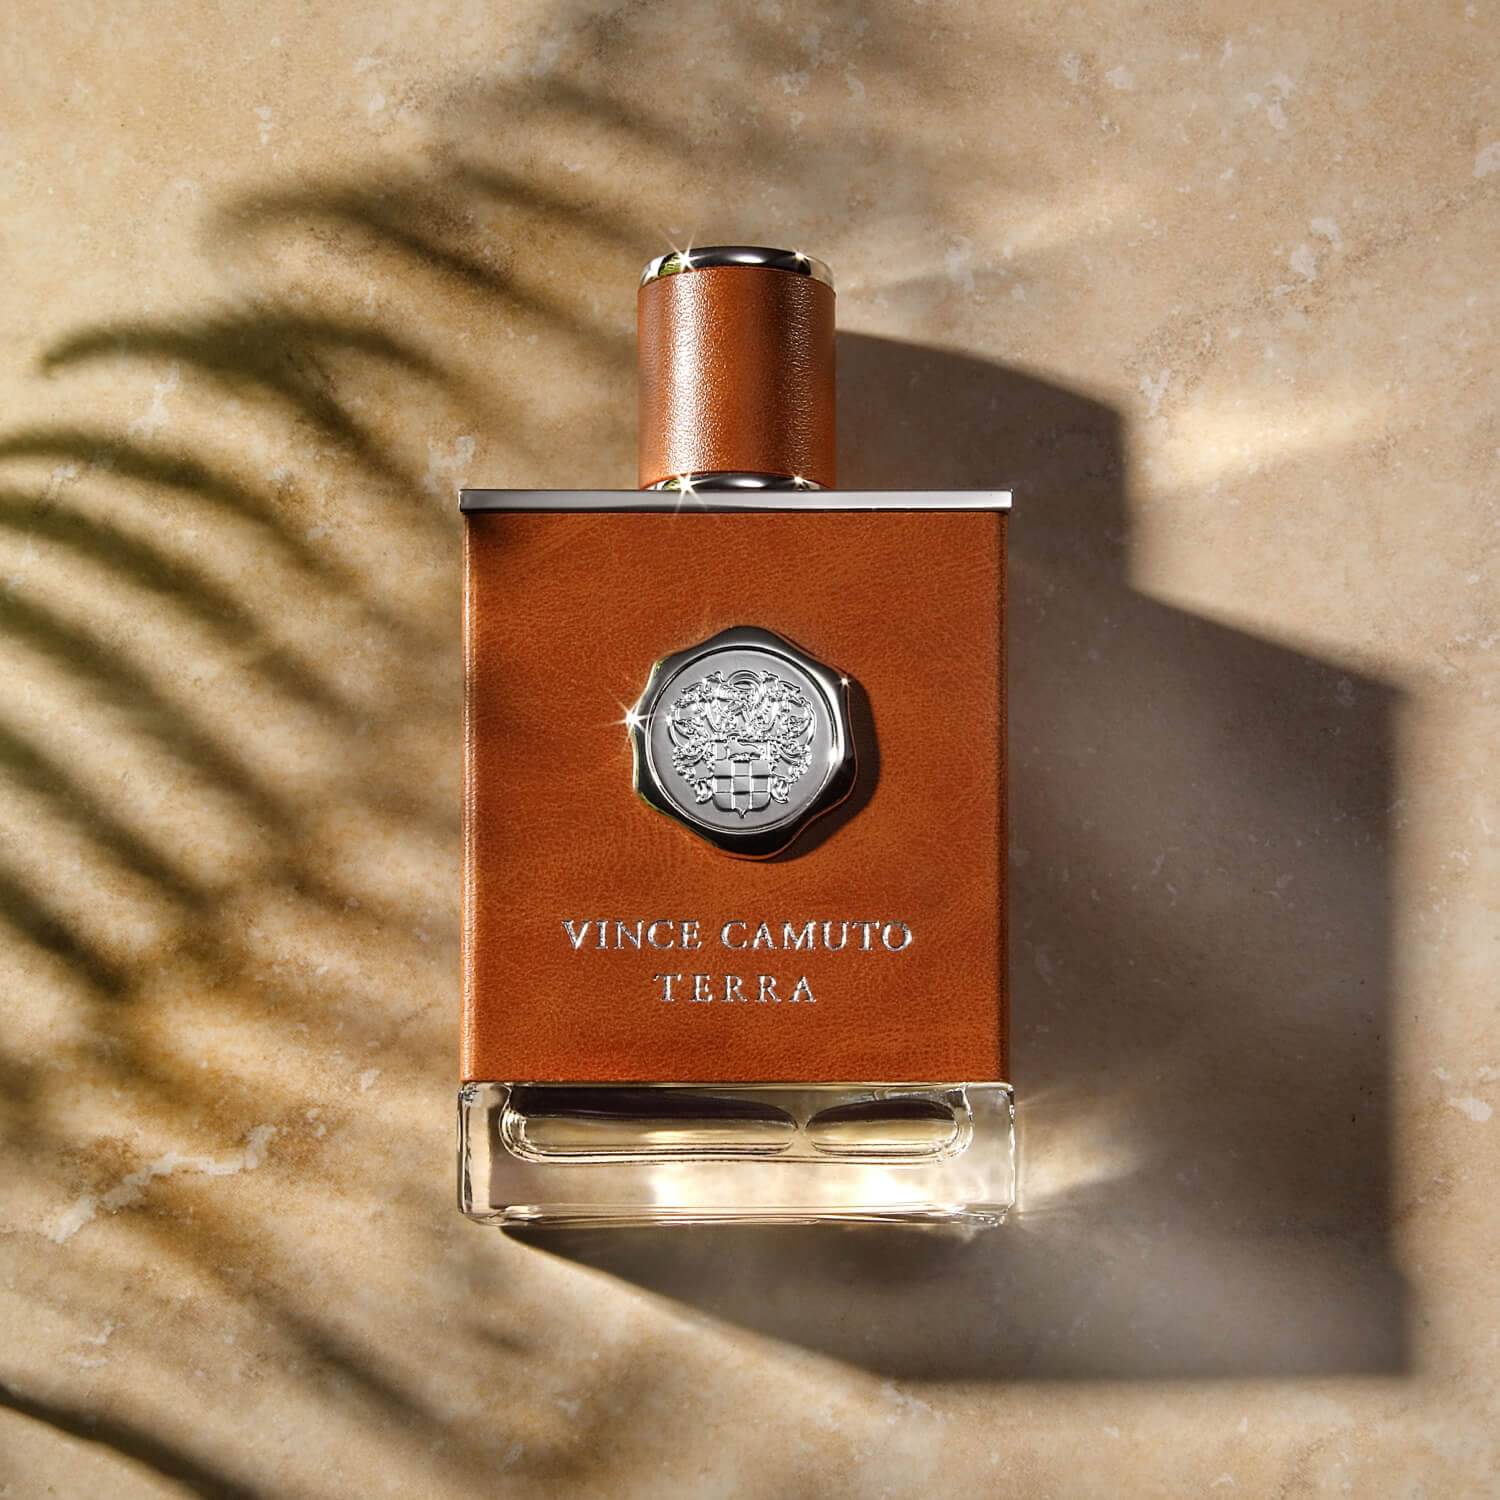 Score VINCE CAMUTO Homme Intenso at Scentbird for $16.95